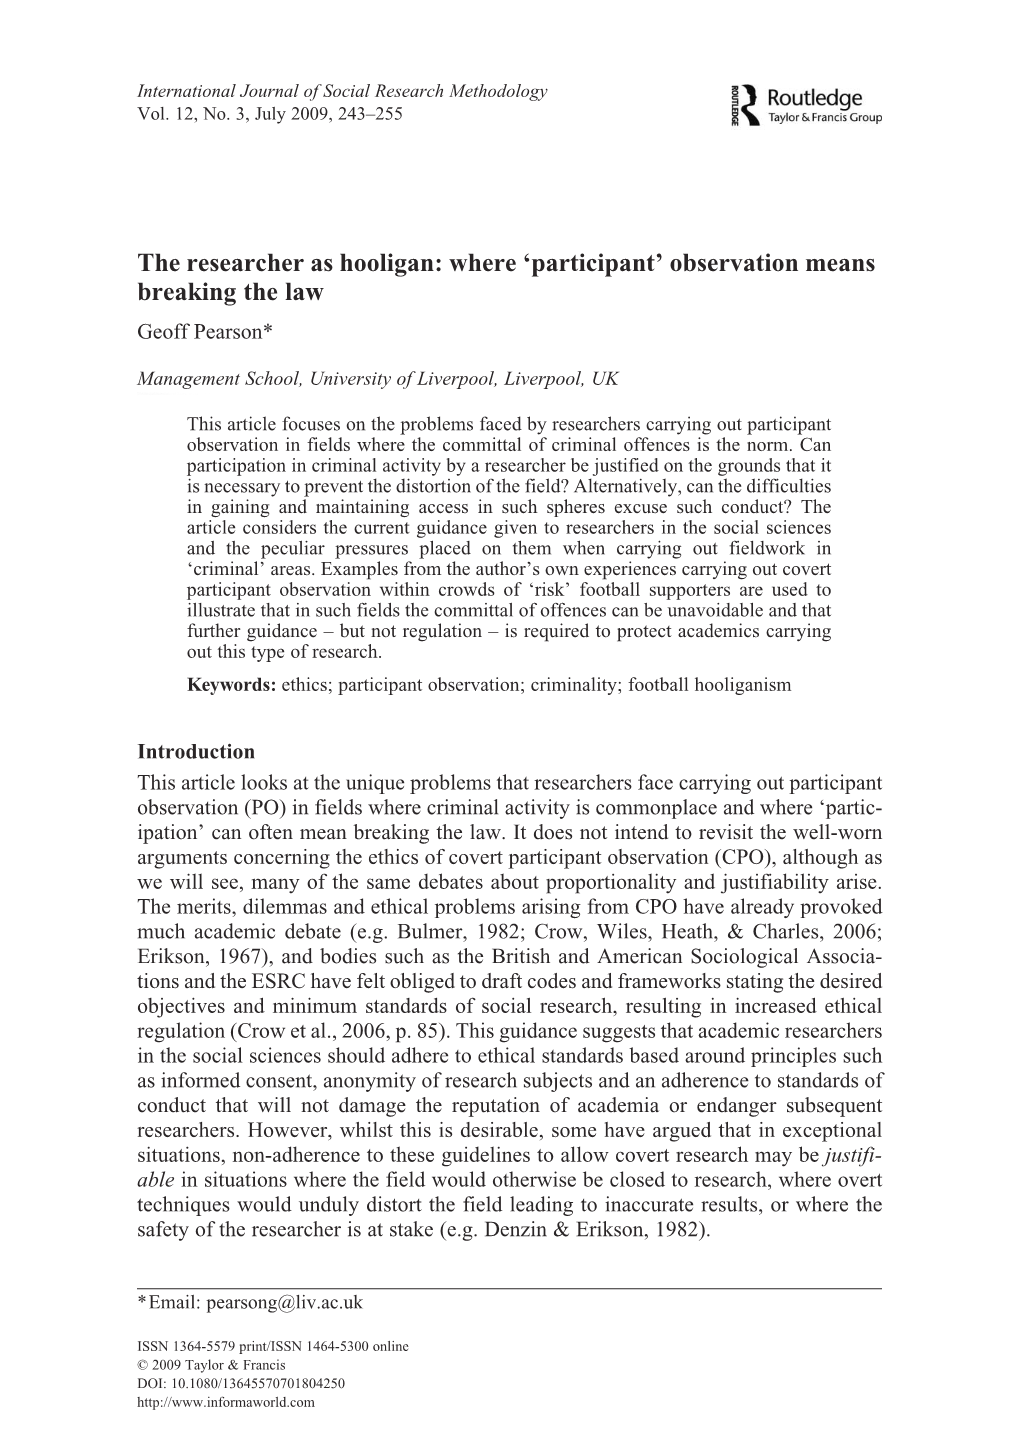 The Researcher As Hooligan: Where 'Participant' Observation Means